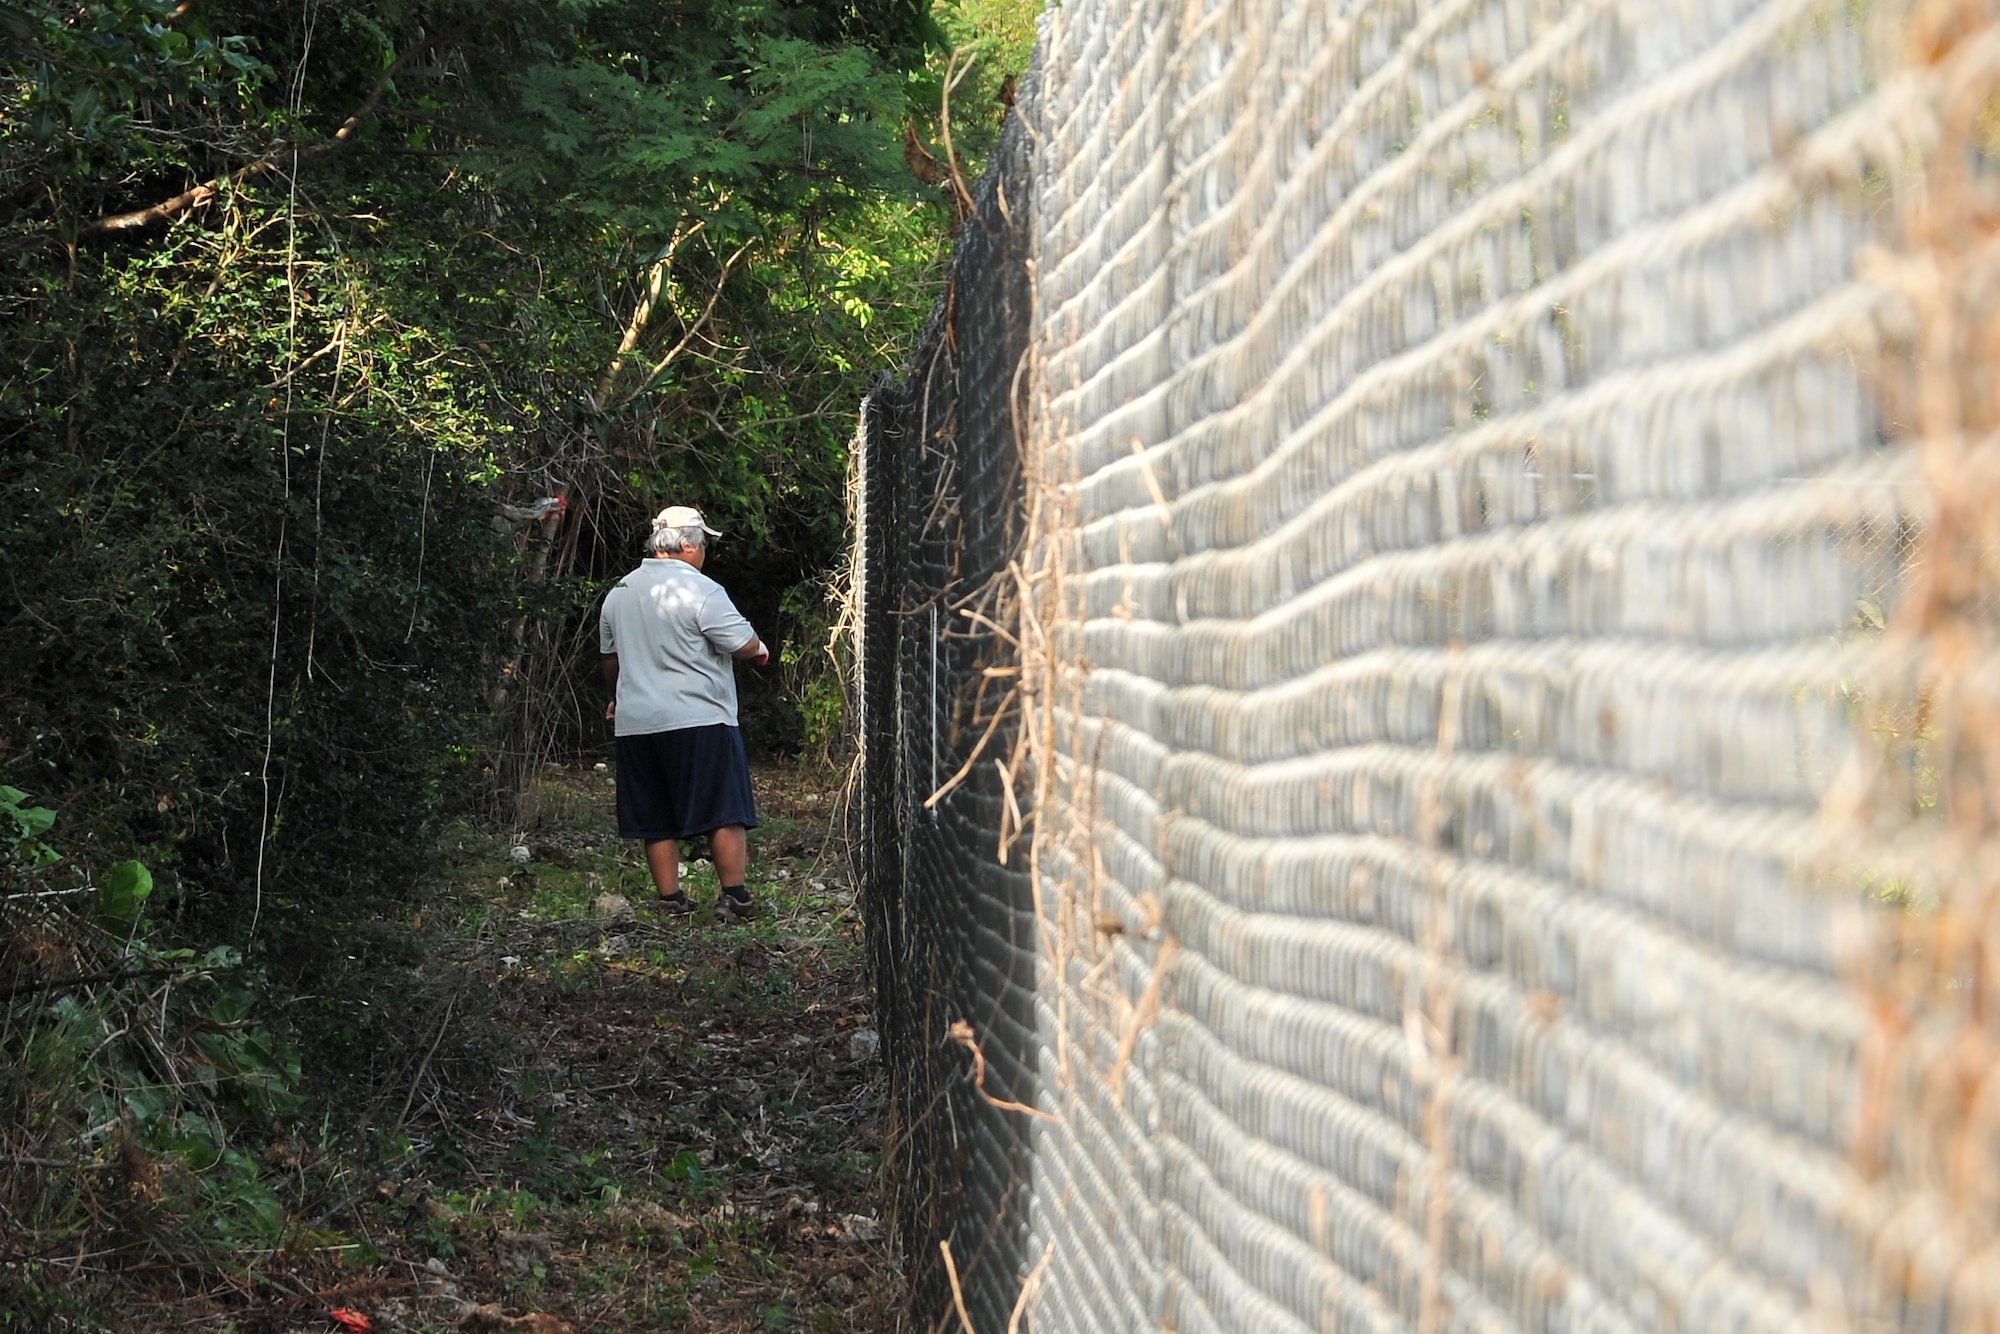 John San Agustin, 36th Civil Engineer Squadron Environmental Flight volunteer conservation officer, clears invasive plants from a fence to keep them from encroaching on a reforestation site located on the other side on Andersen Air Force Base, Guam, April 12, 2014. The 2-acre endangered species habitat site is home to 1,000 juvenile, native limestone forest trees. (U.S. Air Force photo/Staff Sgt. Melissa B. White/Released)